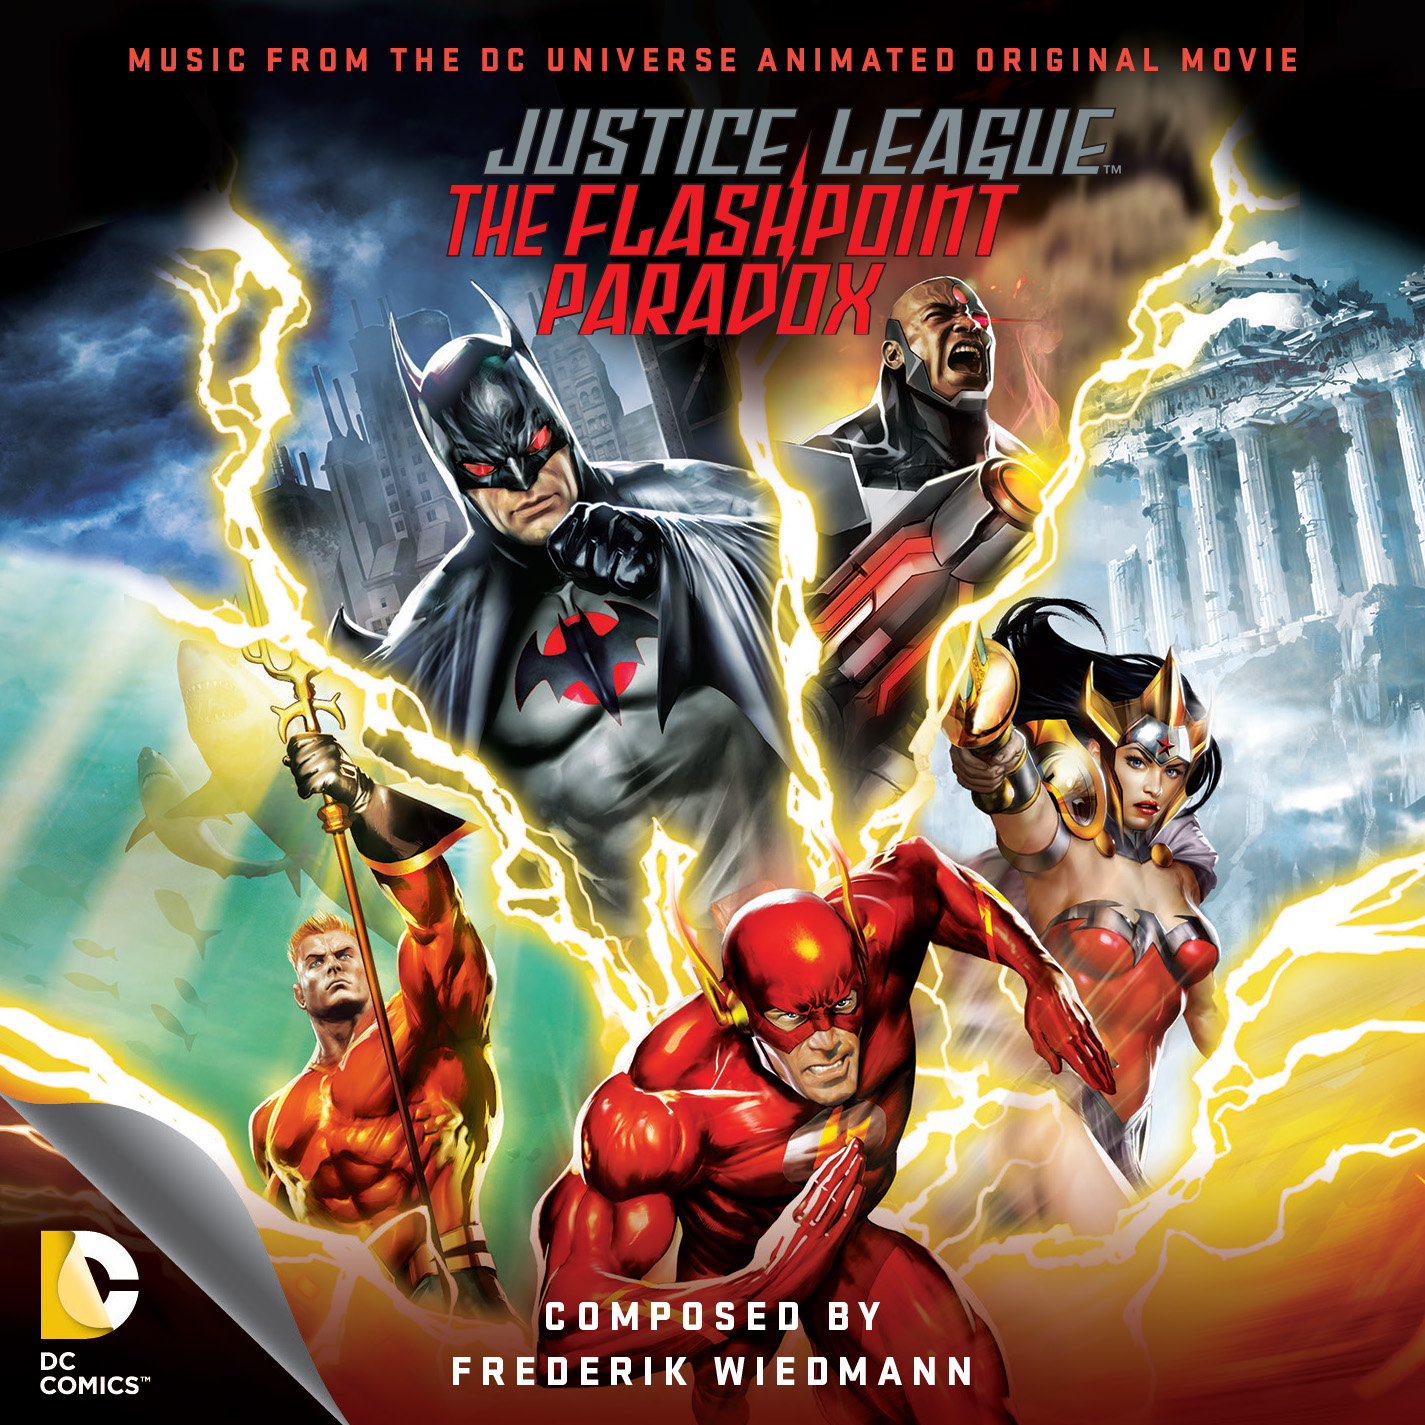 Justice League: The Flashpoint Paradox #5